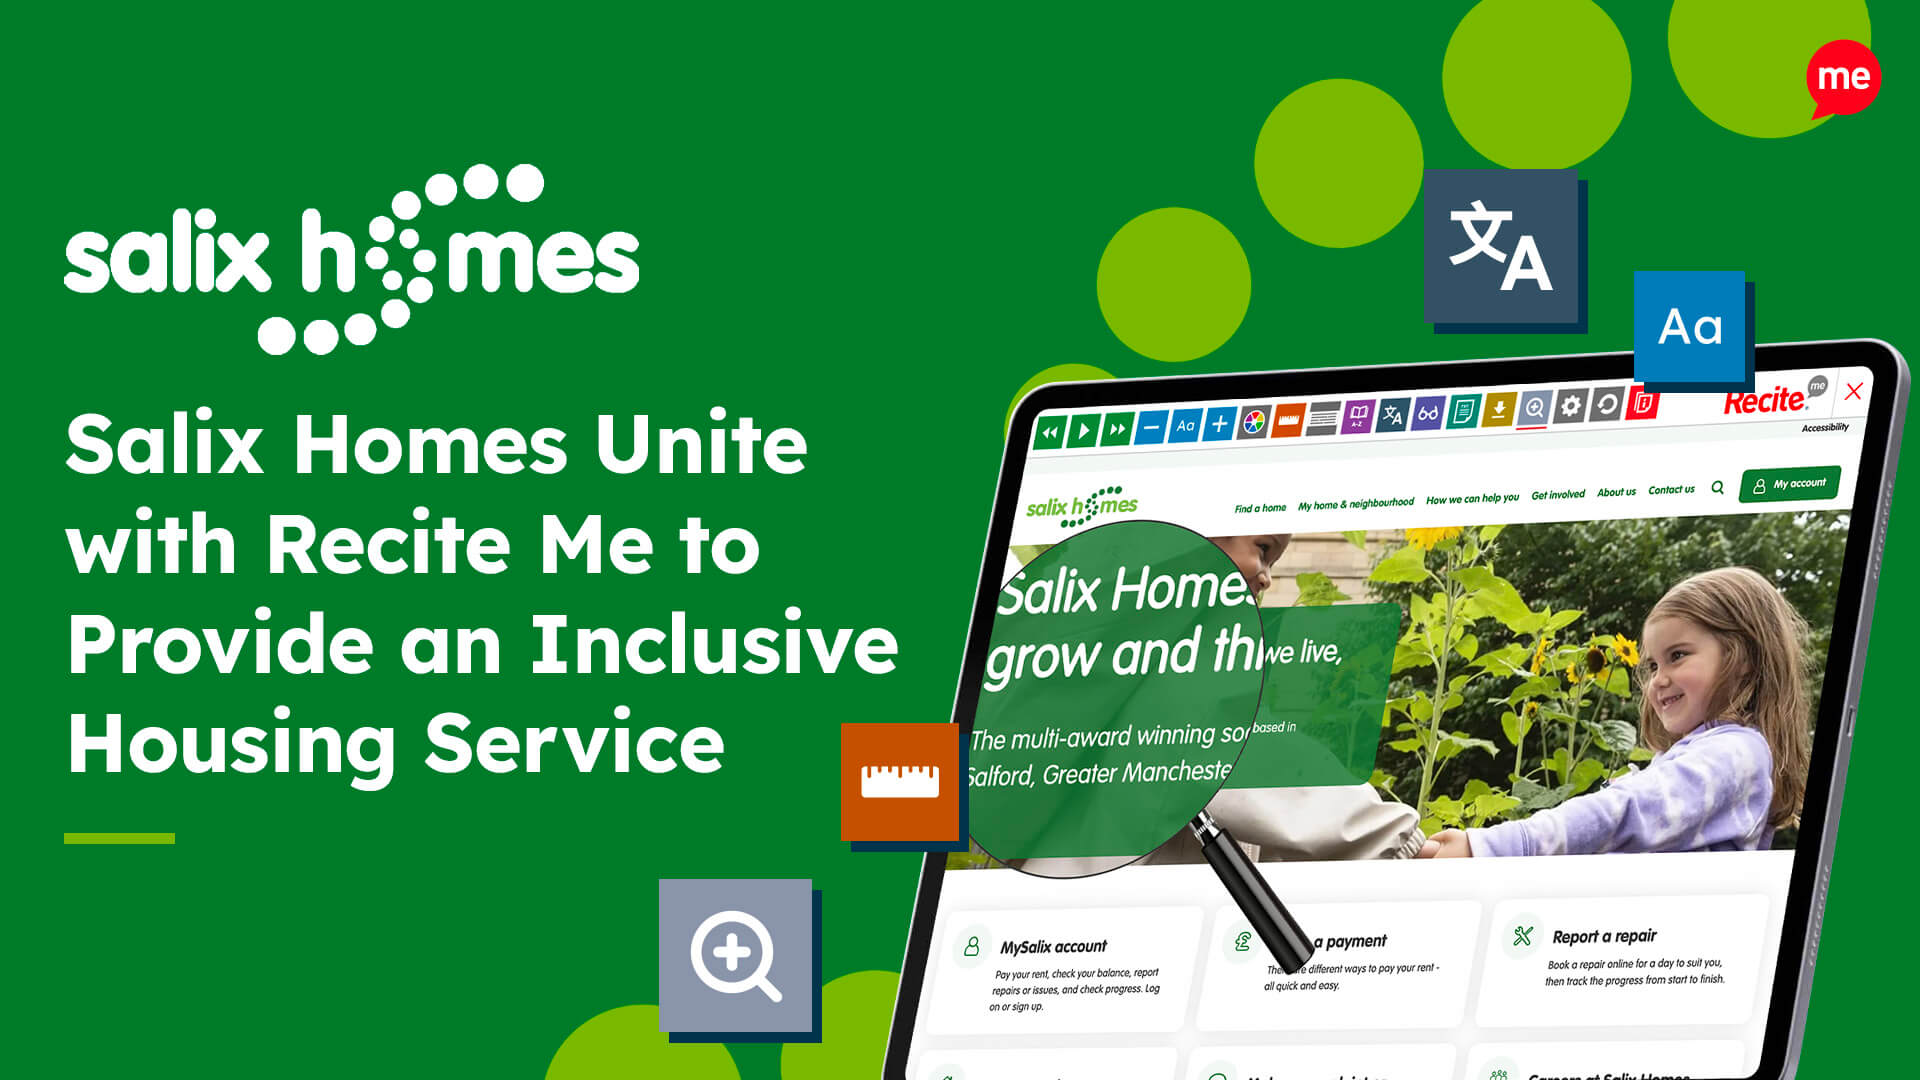 Salix Homes Unite with Recite Me to Provide an Inclusive Housing Service